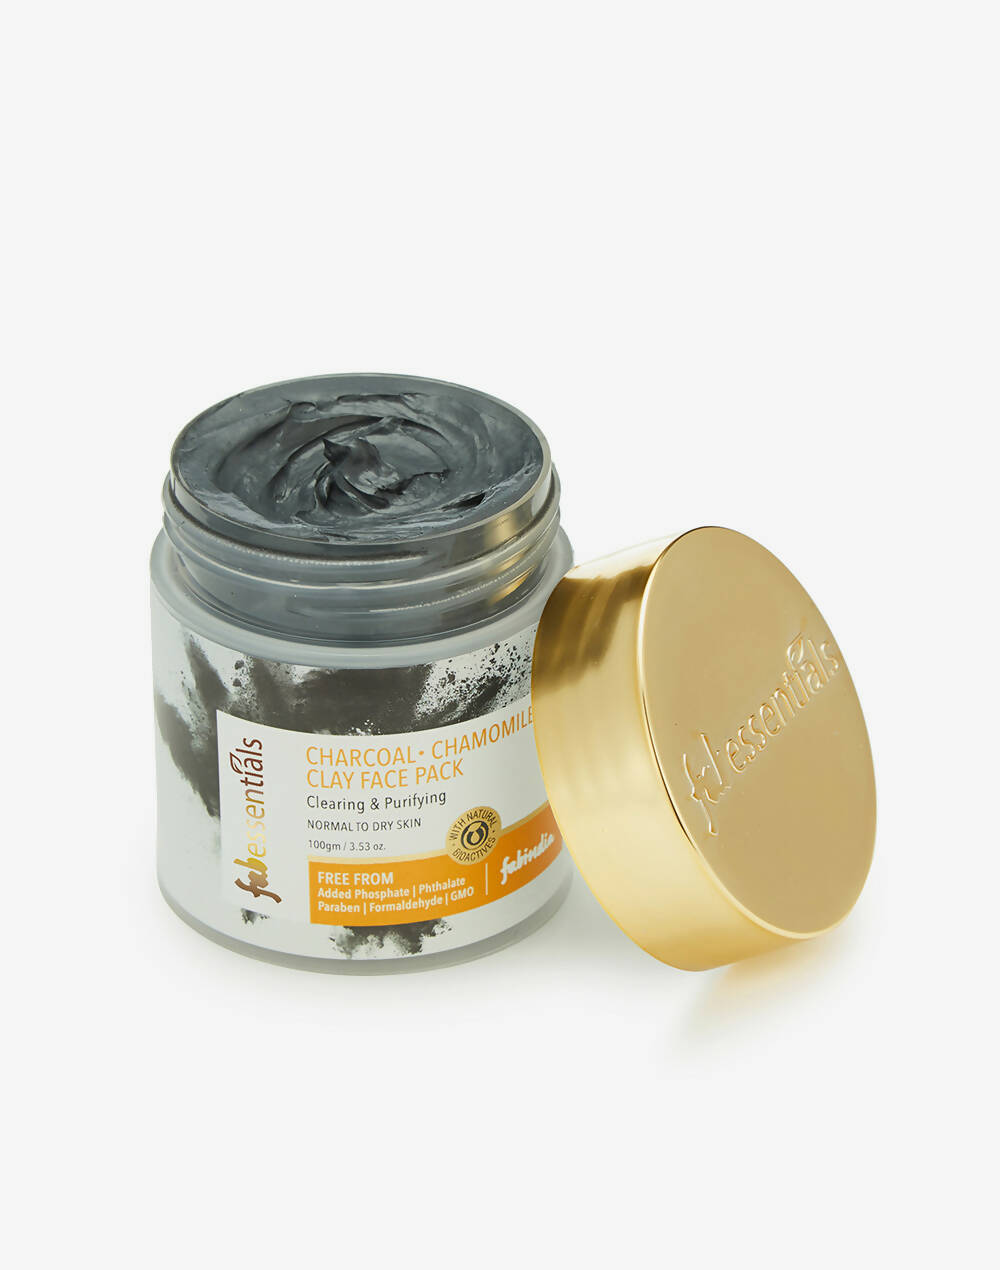 Fabessentials Charcoal Chamomile Clay Face Pack